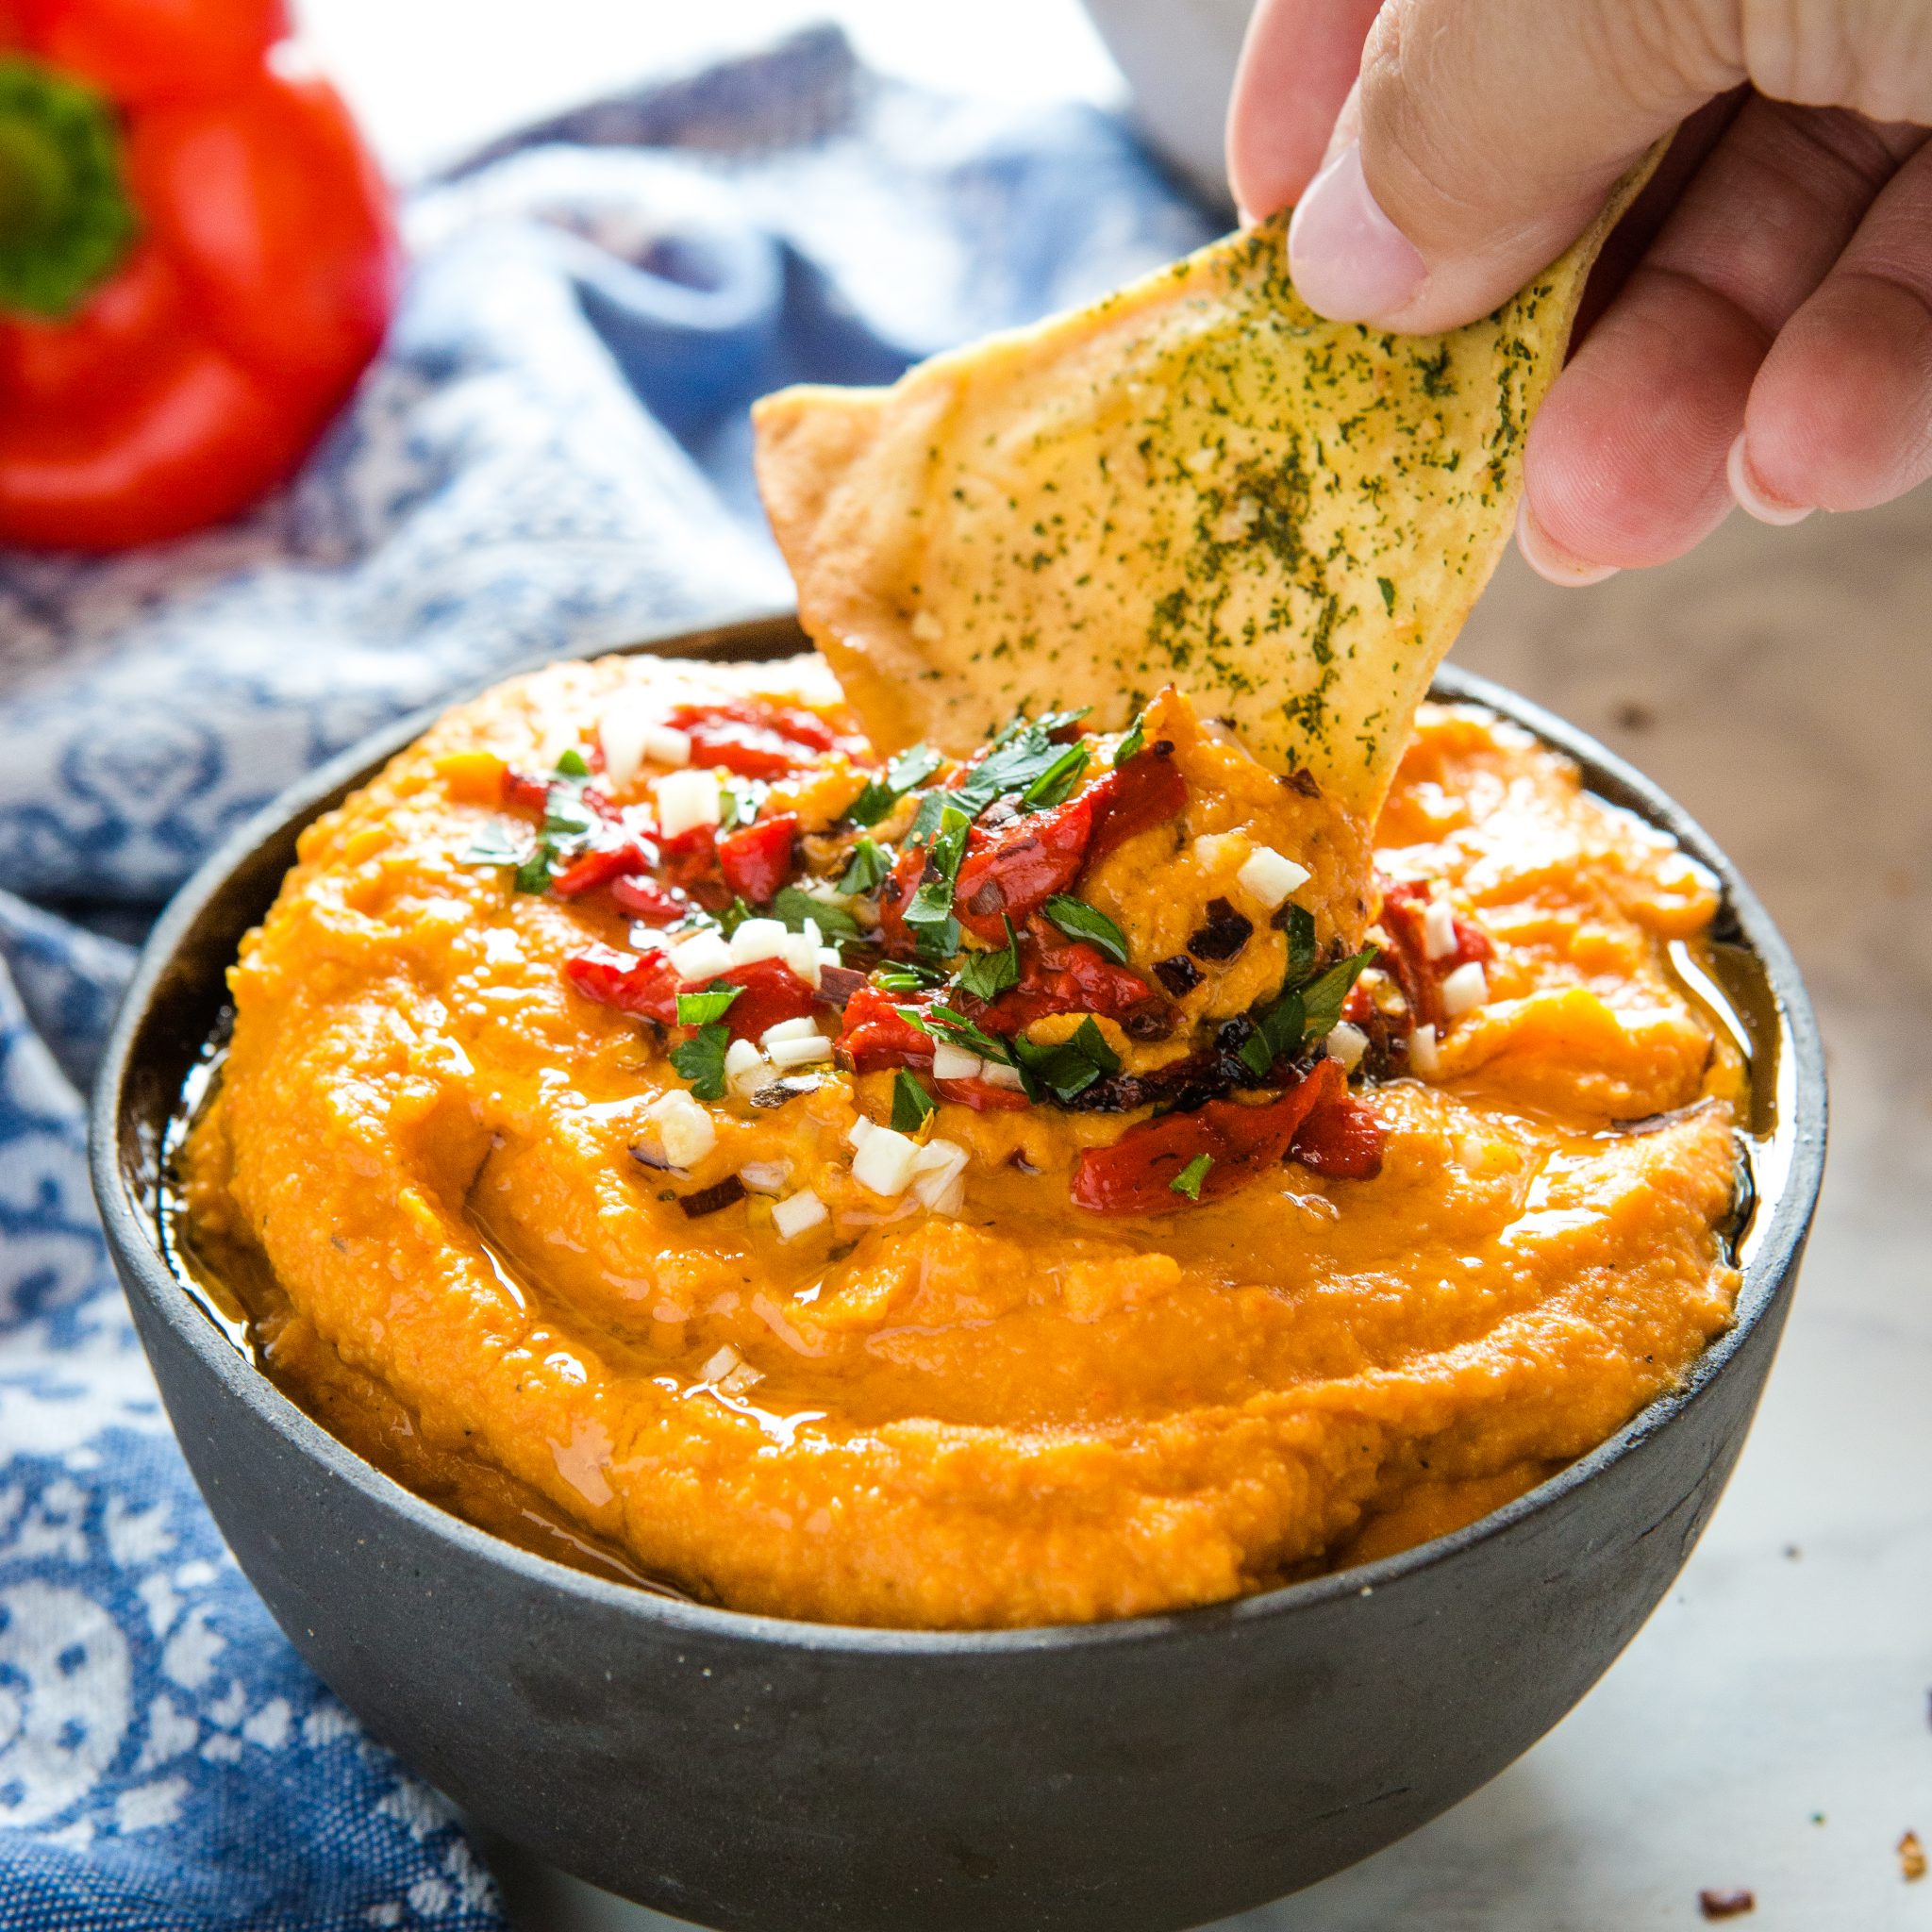 Here's some snack pack inspo for work/school next week! As always, th, red pepper hummus